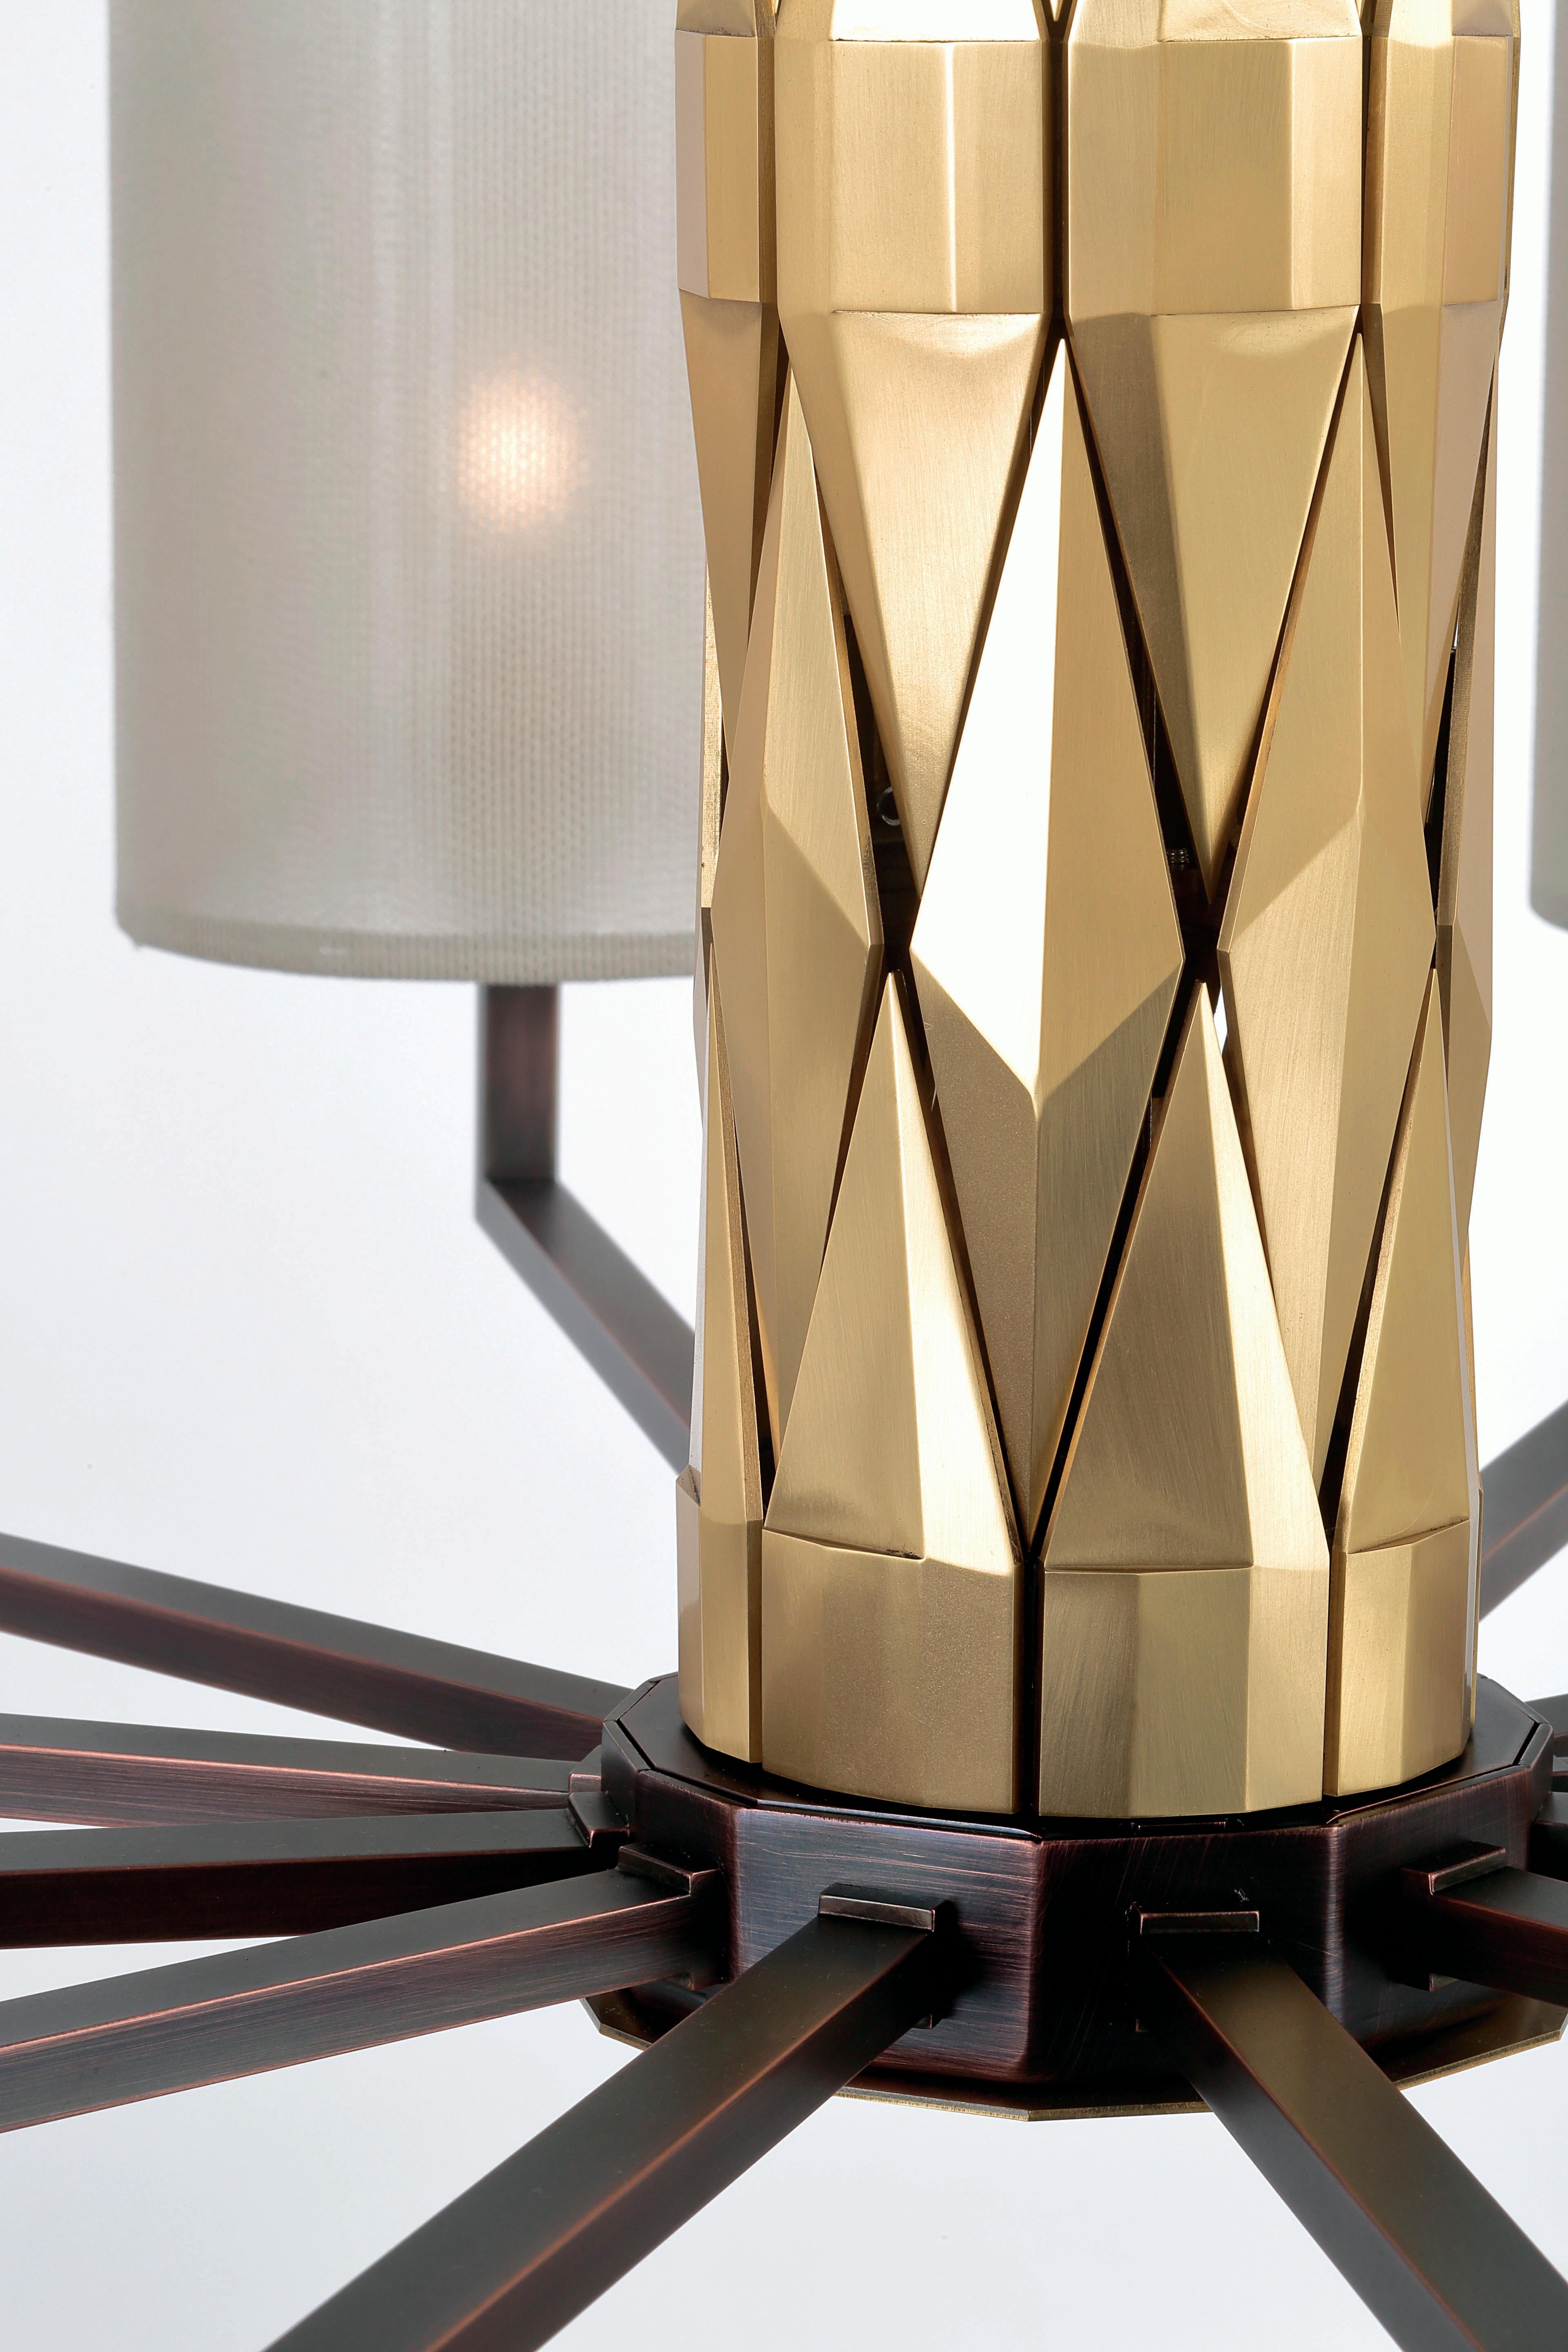 Flaire collection - Rich central body composed of many solid brass elements, bevelled in various ways for an array of facets.

Central structure and detailing in solid natural brass; lamp holders, base and inner structure in burnished copper